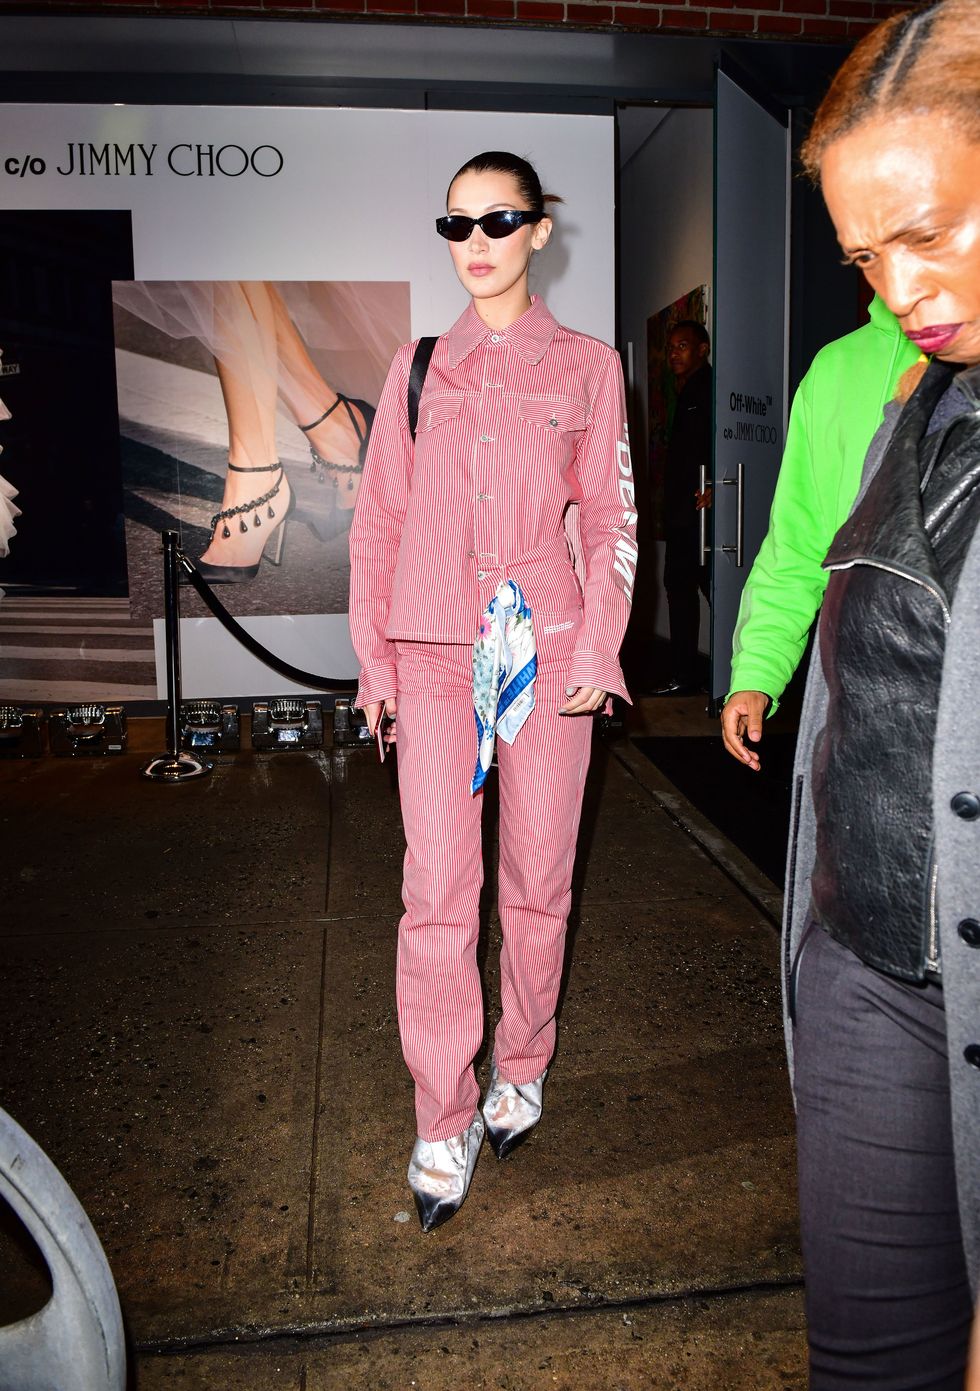 Supermodels arrive and leave the Off-White x Jimmy Choo party at NYFW